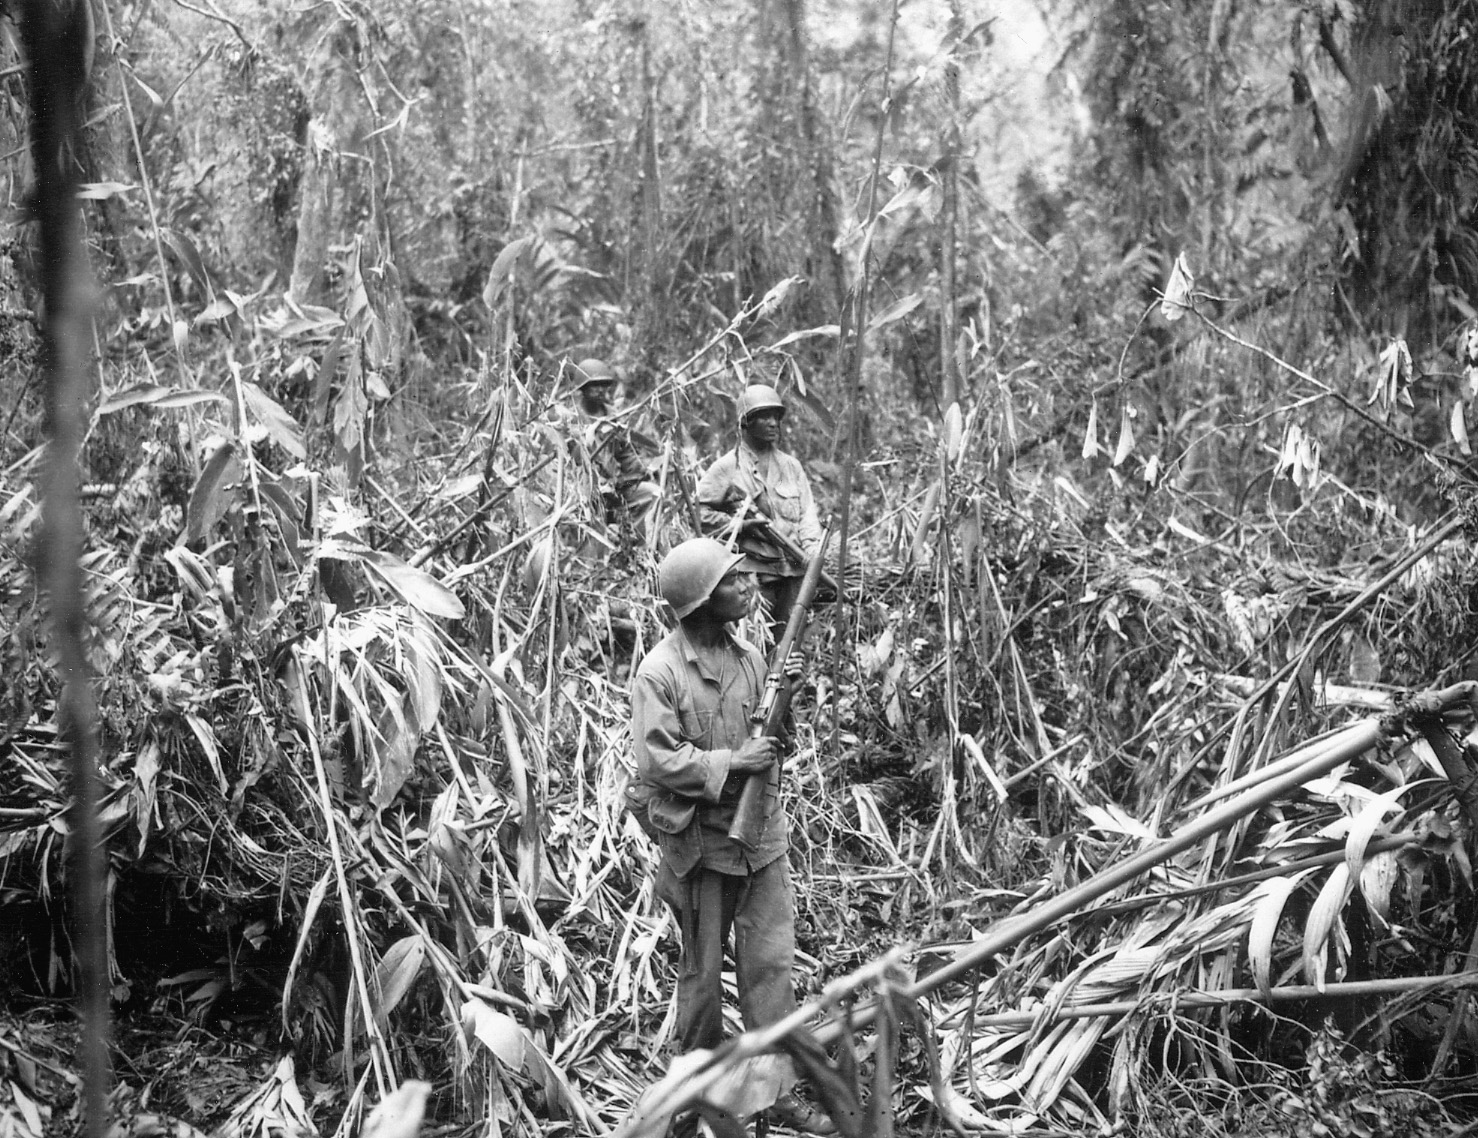 Battling heat, insects, vegetation, and the Japanese enemy, U.S. soldiers of the 93rd Infantry Division advance along the Numa-Numa Trail.